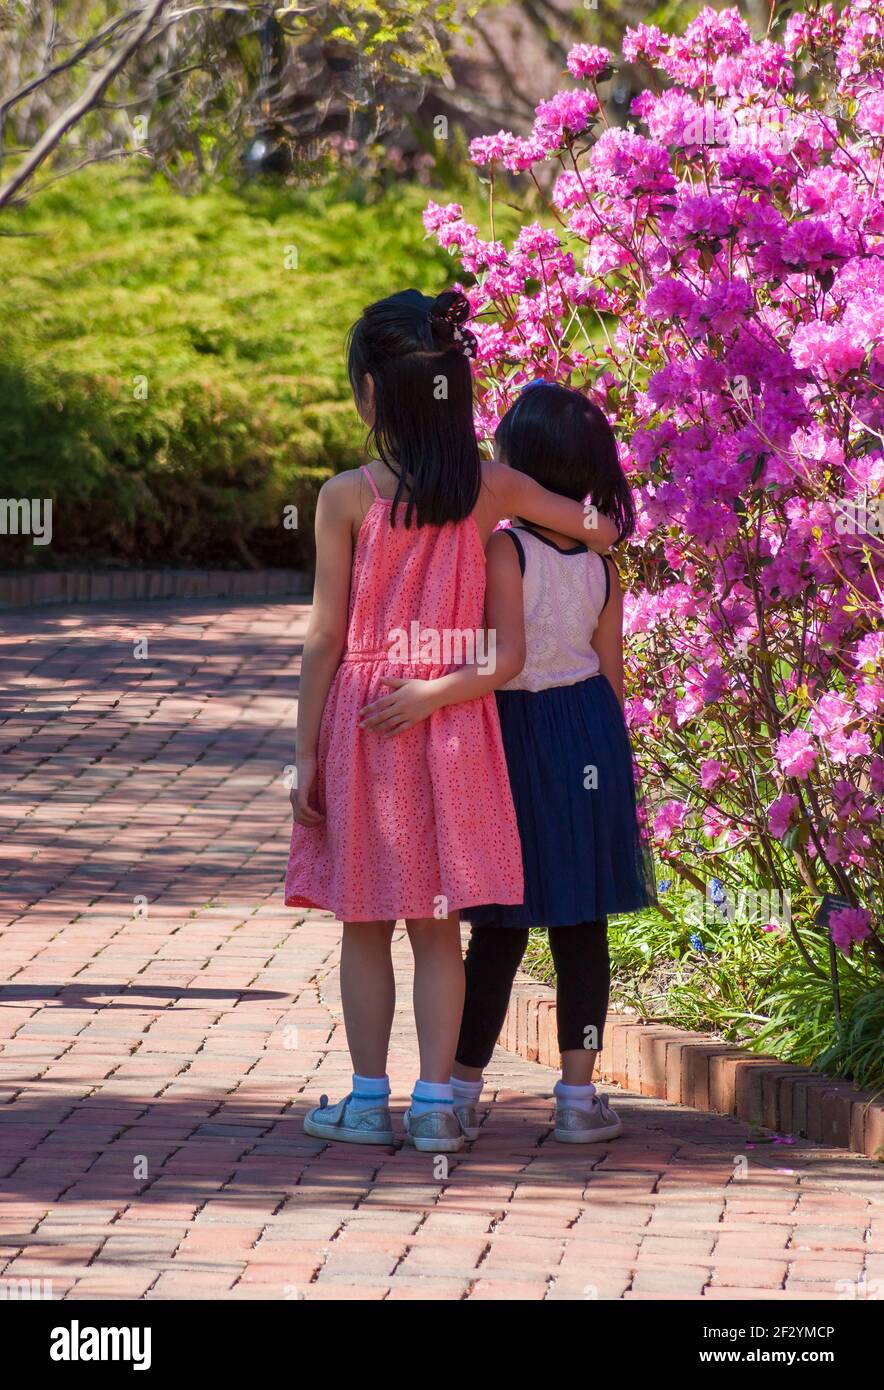 Young sisters posing for a snapshot near a Rhododendron shrub with bright purple flower. New England Botanic Garden at Tower Hill, Boylston, MA, US Stock Photo